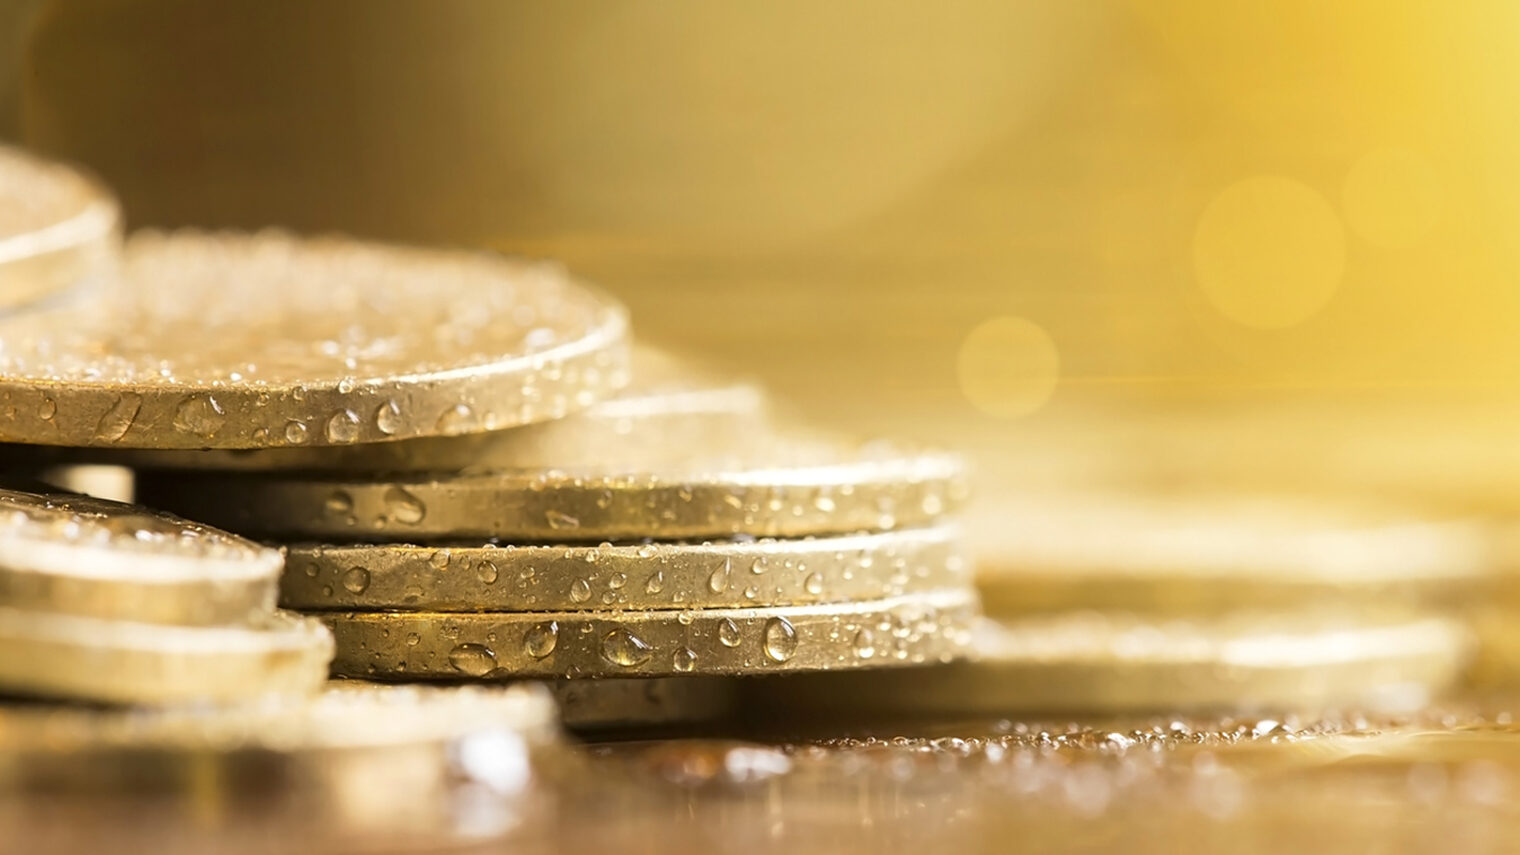 Website banner of golden money coins Schlagwort(e): coin, coins, money, gold, golden, banner, background, copy space, web, website banner, panorama, template, metal, concept, wealth, rich, richness, success, story, successful, savings, finance, financial, earning, luxury, euro, dollar, business, currency, value, fortune, economy, monetary, investment, bank, banking, market, stock exchange, fund, red, yellow, bronze, loan, lending, coin, coins, money, gold, golden, banner, background, copy space, web, website banner, panorama, template, metal, concept, wealth, rich, richness, success, story, successful, savings, finance, financial, earning, luxury, euro, dollar, business, currency, value, fortune, economy, monetary, investment, bank, banking, market, stock exchange, fund, red, yellow, bronze, loan, lending